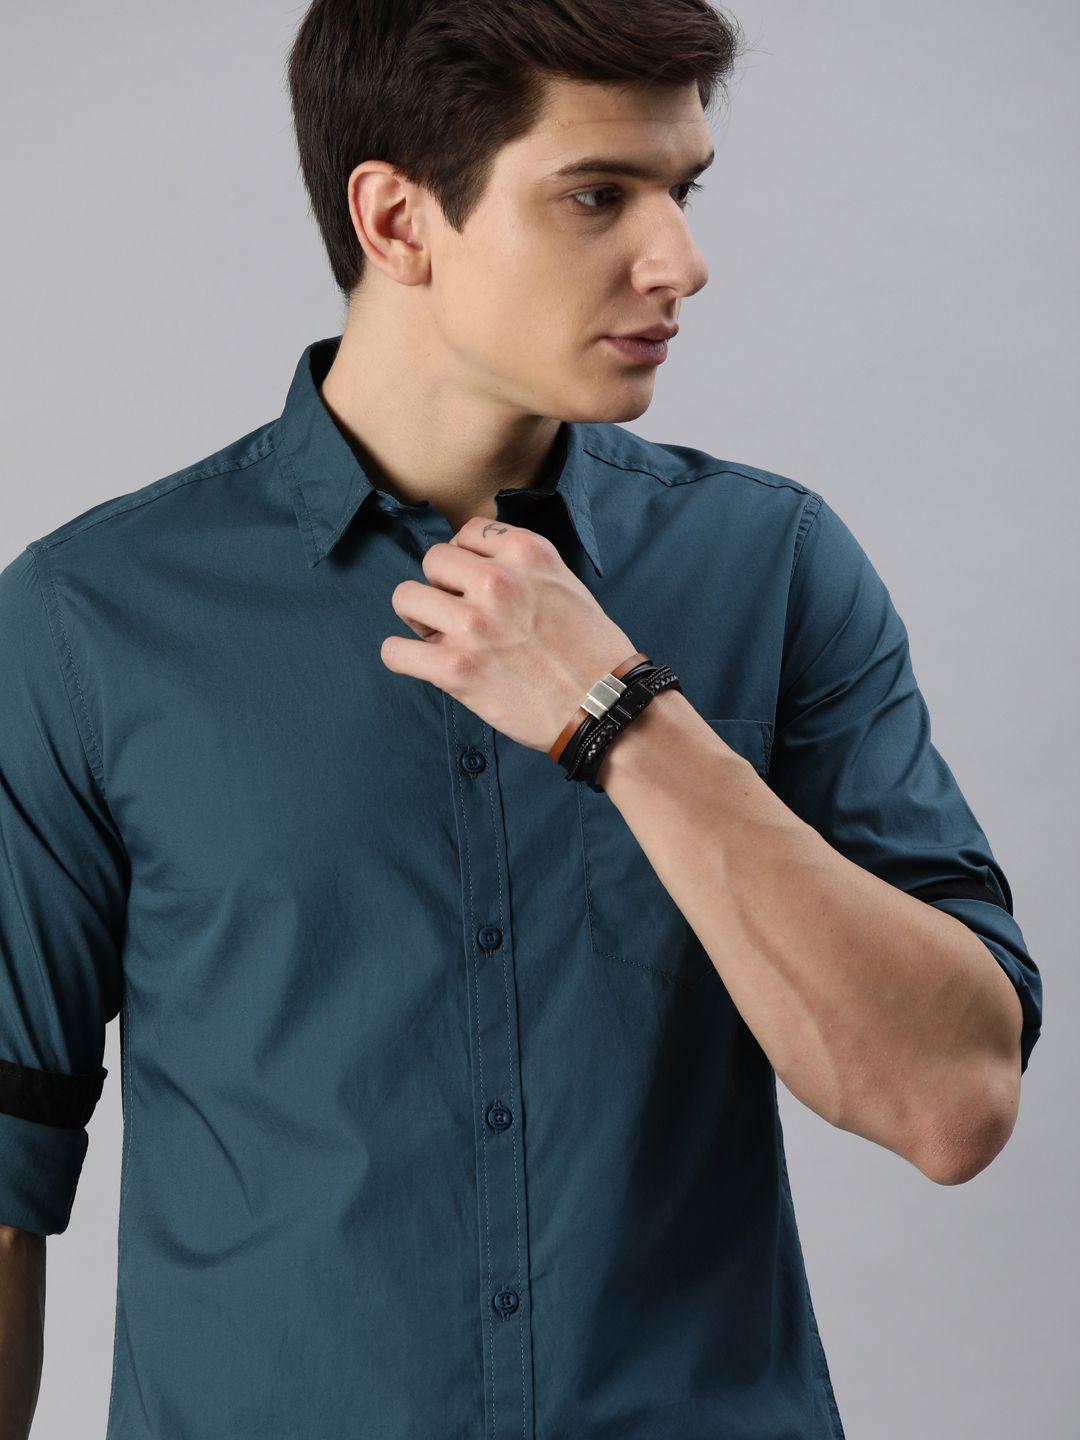 roadster men teal blue cotton sustainable casual shirt